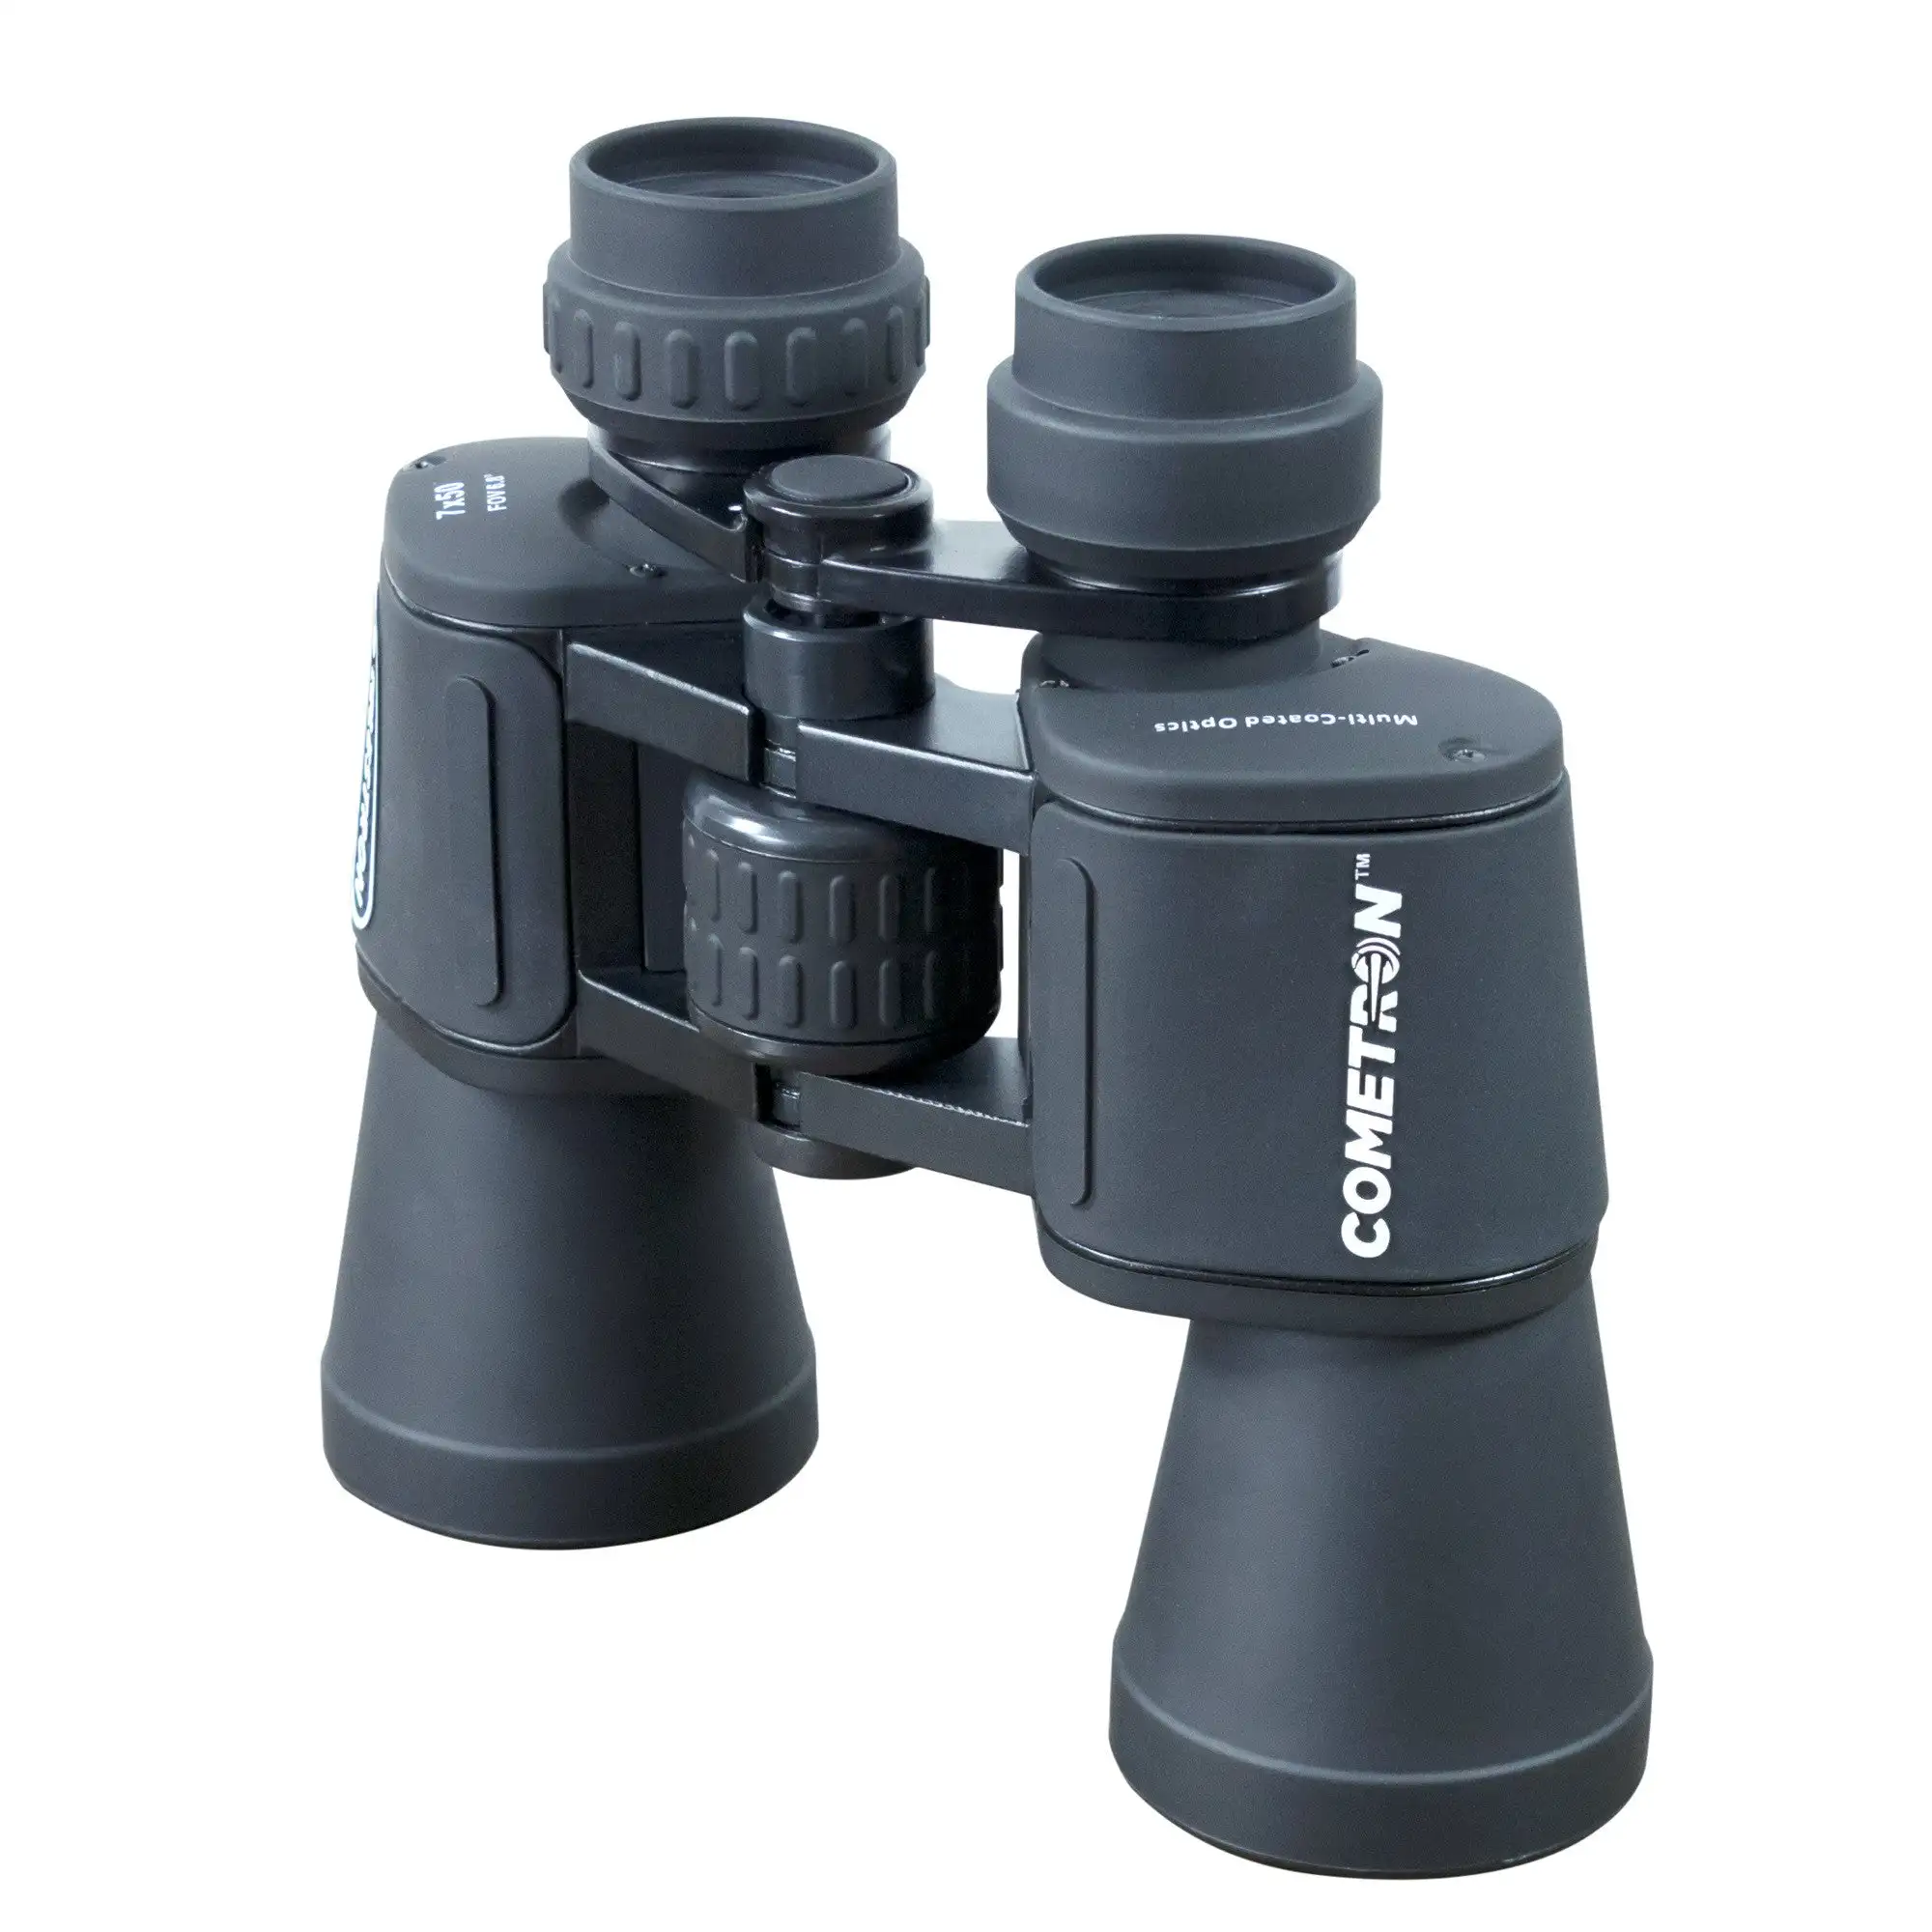 

Celestron Cometron 7x50 Beginner Astronomy Binoculars Large 50mm Objective Lenses Wide Field of View 7x Magnification Telescope